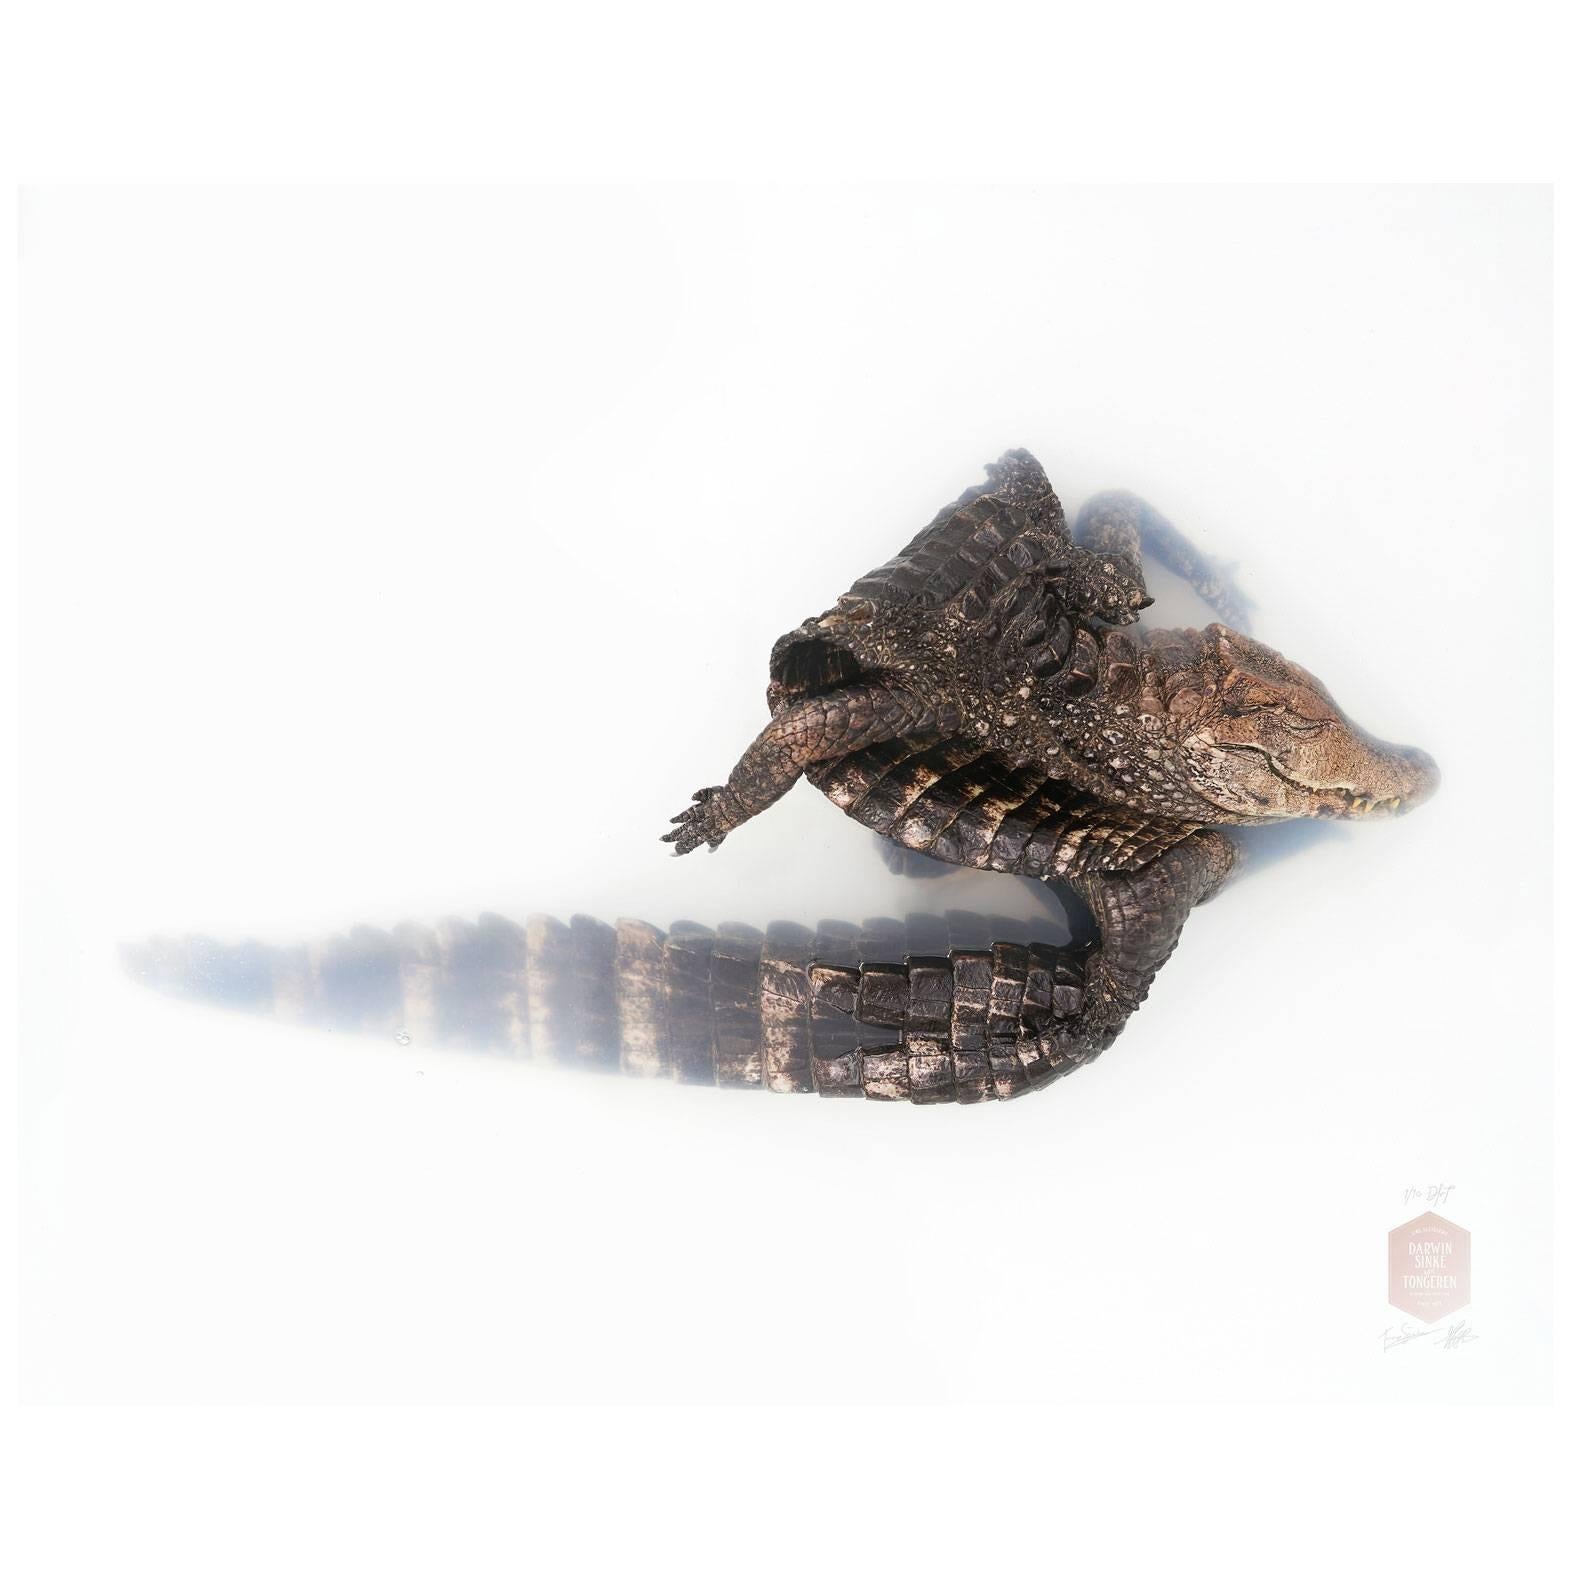 Art Print Titled 'Unknown Pose by Curvier's Cayman' by Sinke & Van Tongeren For Sale